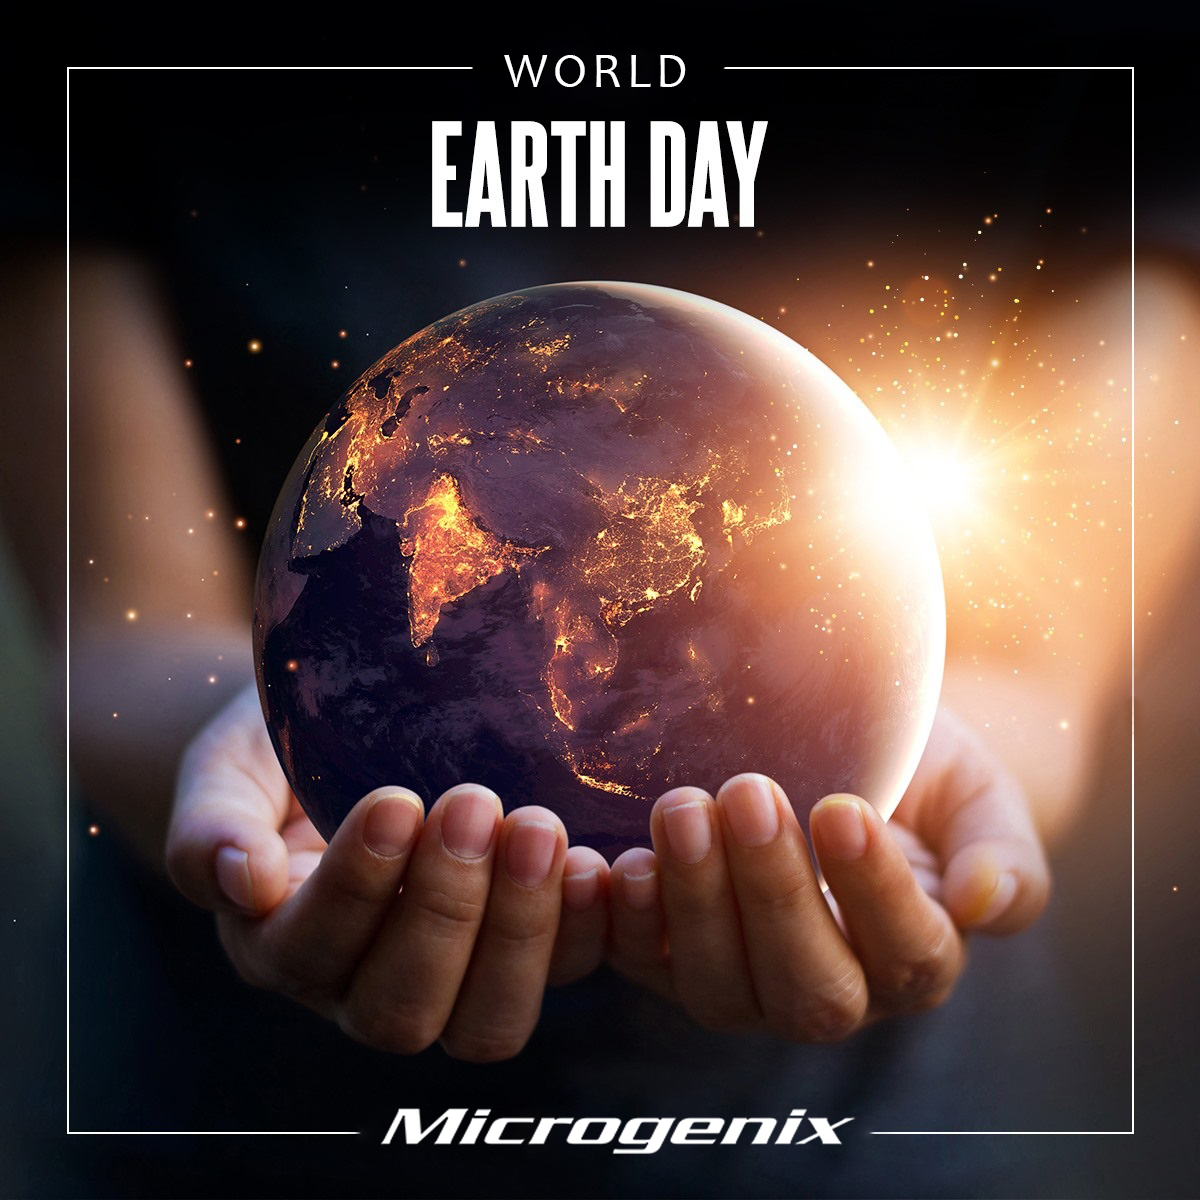 At #Microgenix, we are committed to inspiring change on our world & promoting sustainable practices in everything we do. 

#WorldEarthDay #innovation #sustainablesolutions #savetheplanet #Committosustainability #GoGreen #MadeInGreen #Sustainability #ObsessedWithQuality